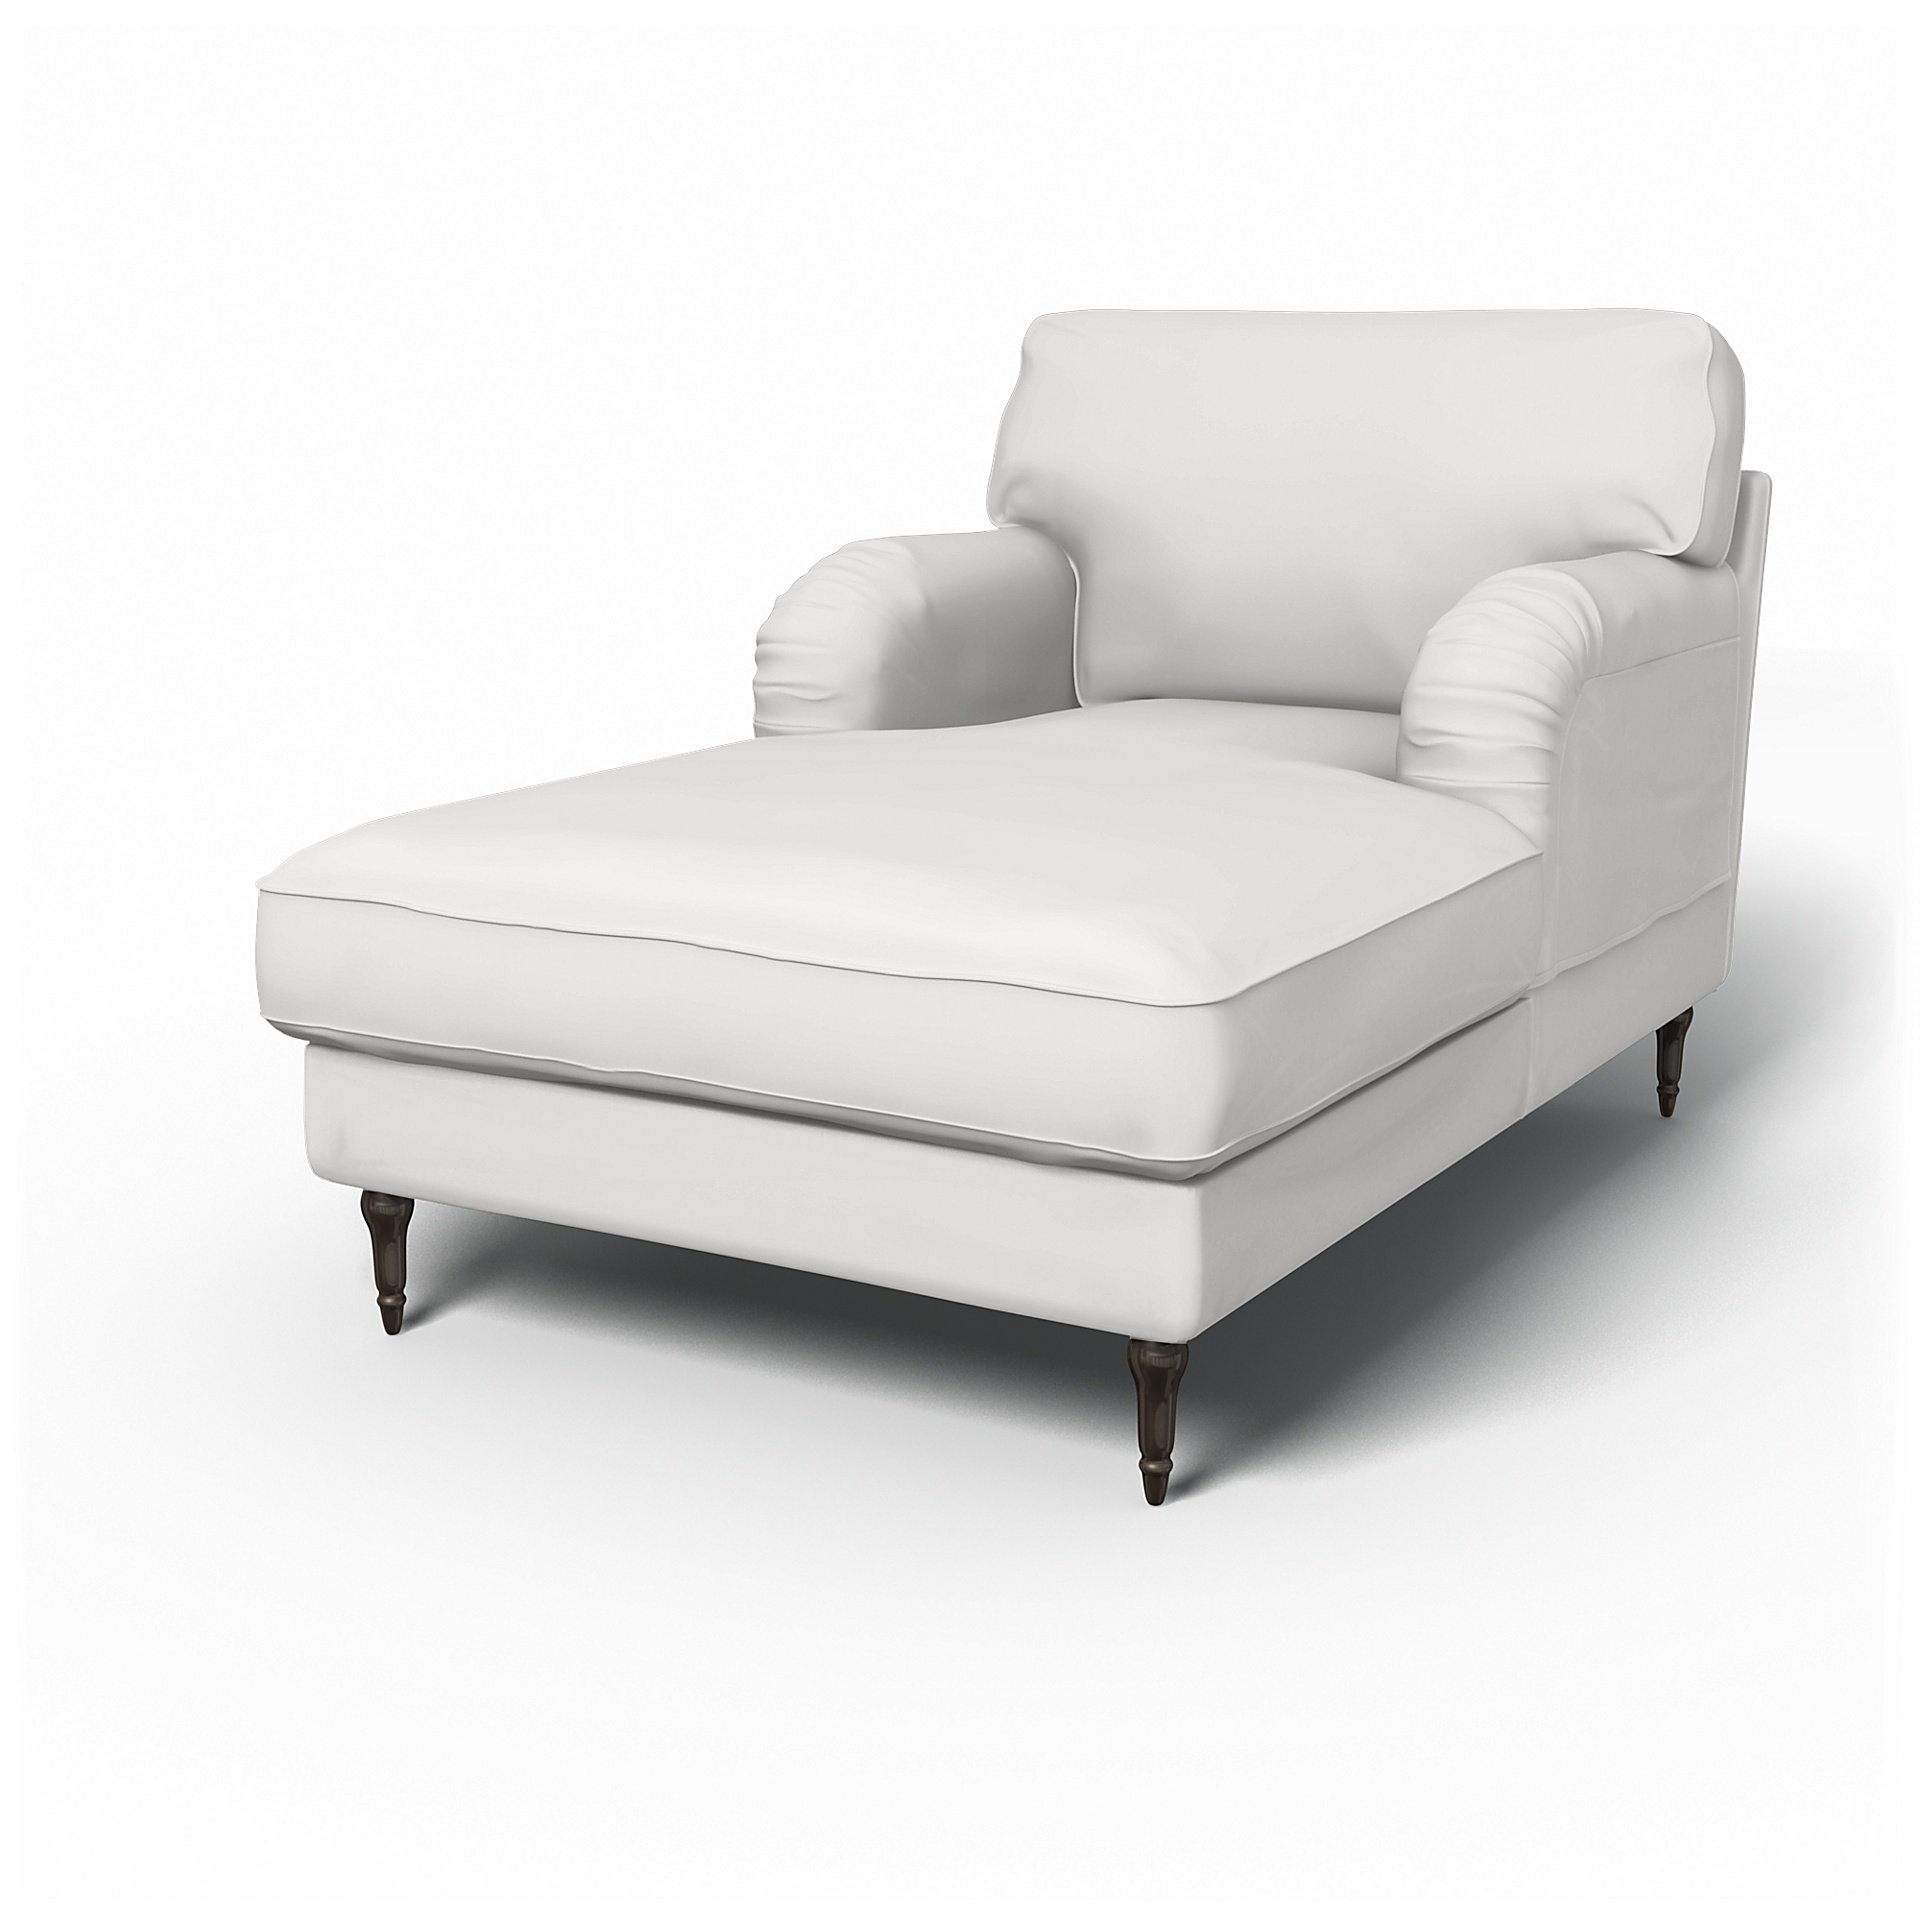 IKEA - Stocksund Chaise Longue Cover, Absolute White, Cotton - Bemz